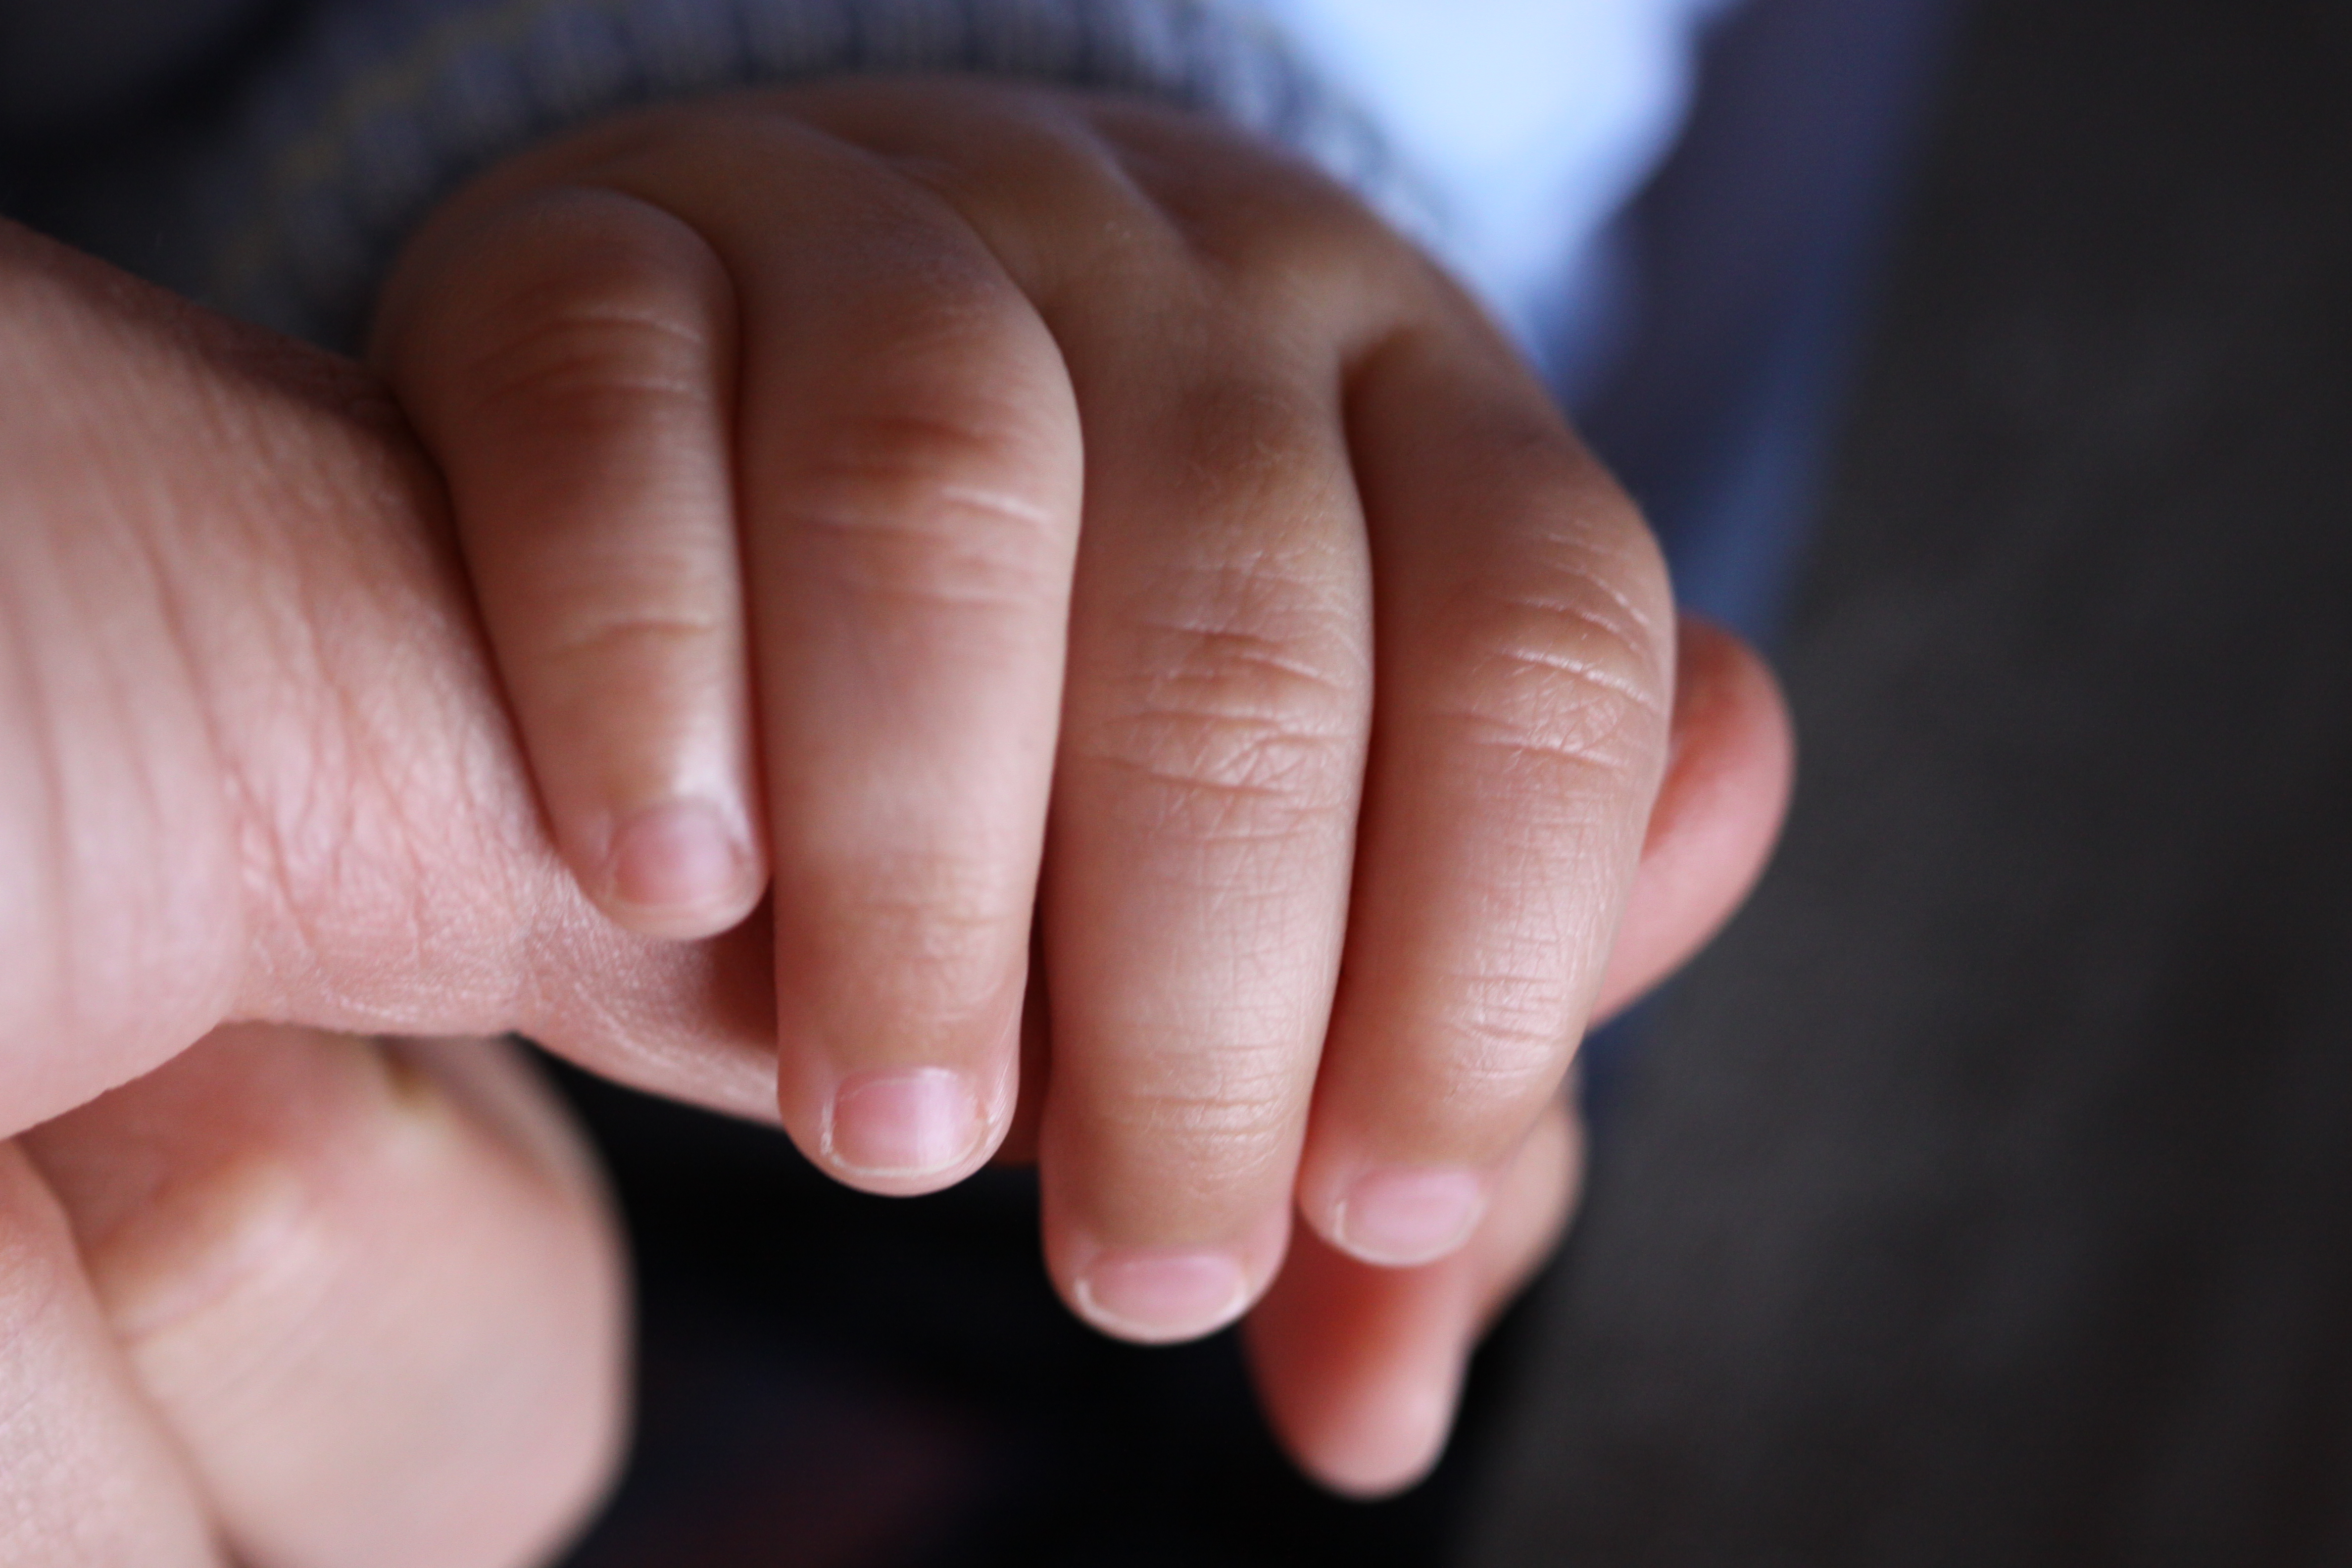 A baby's hand gripping an adult thumb